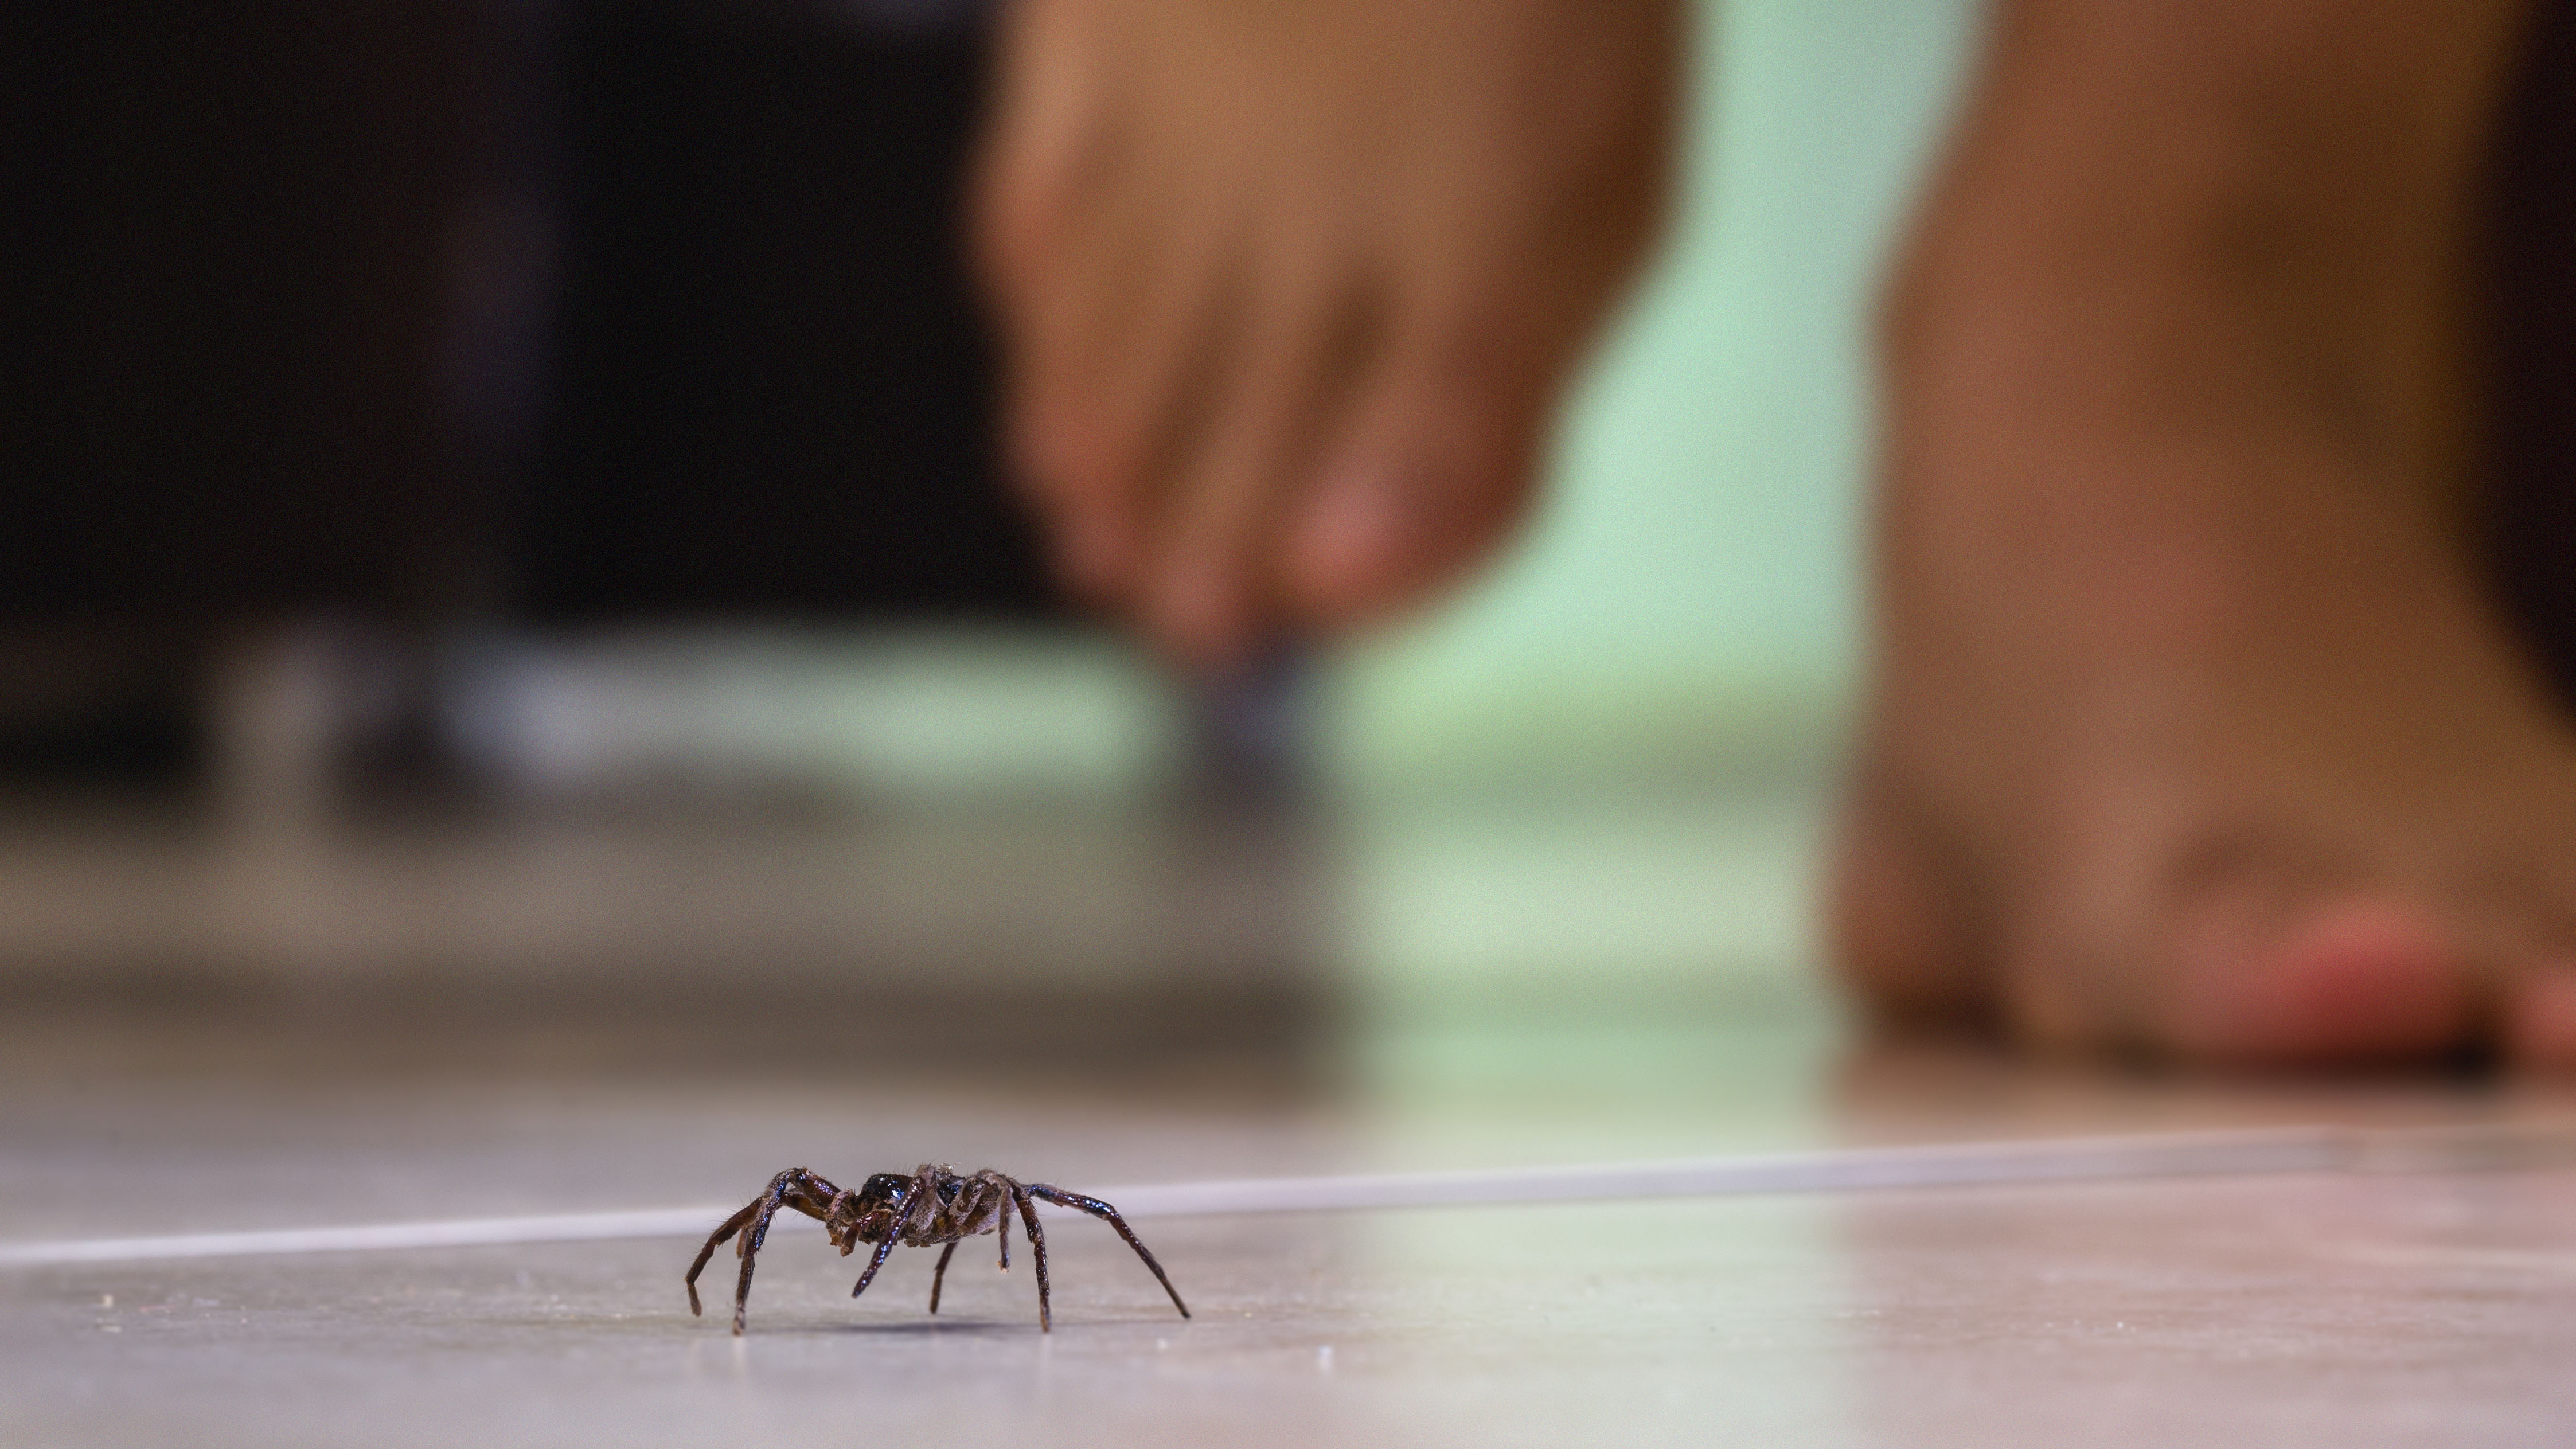 A spider crawling along the floor with someone walking barefoot in the background